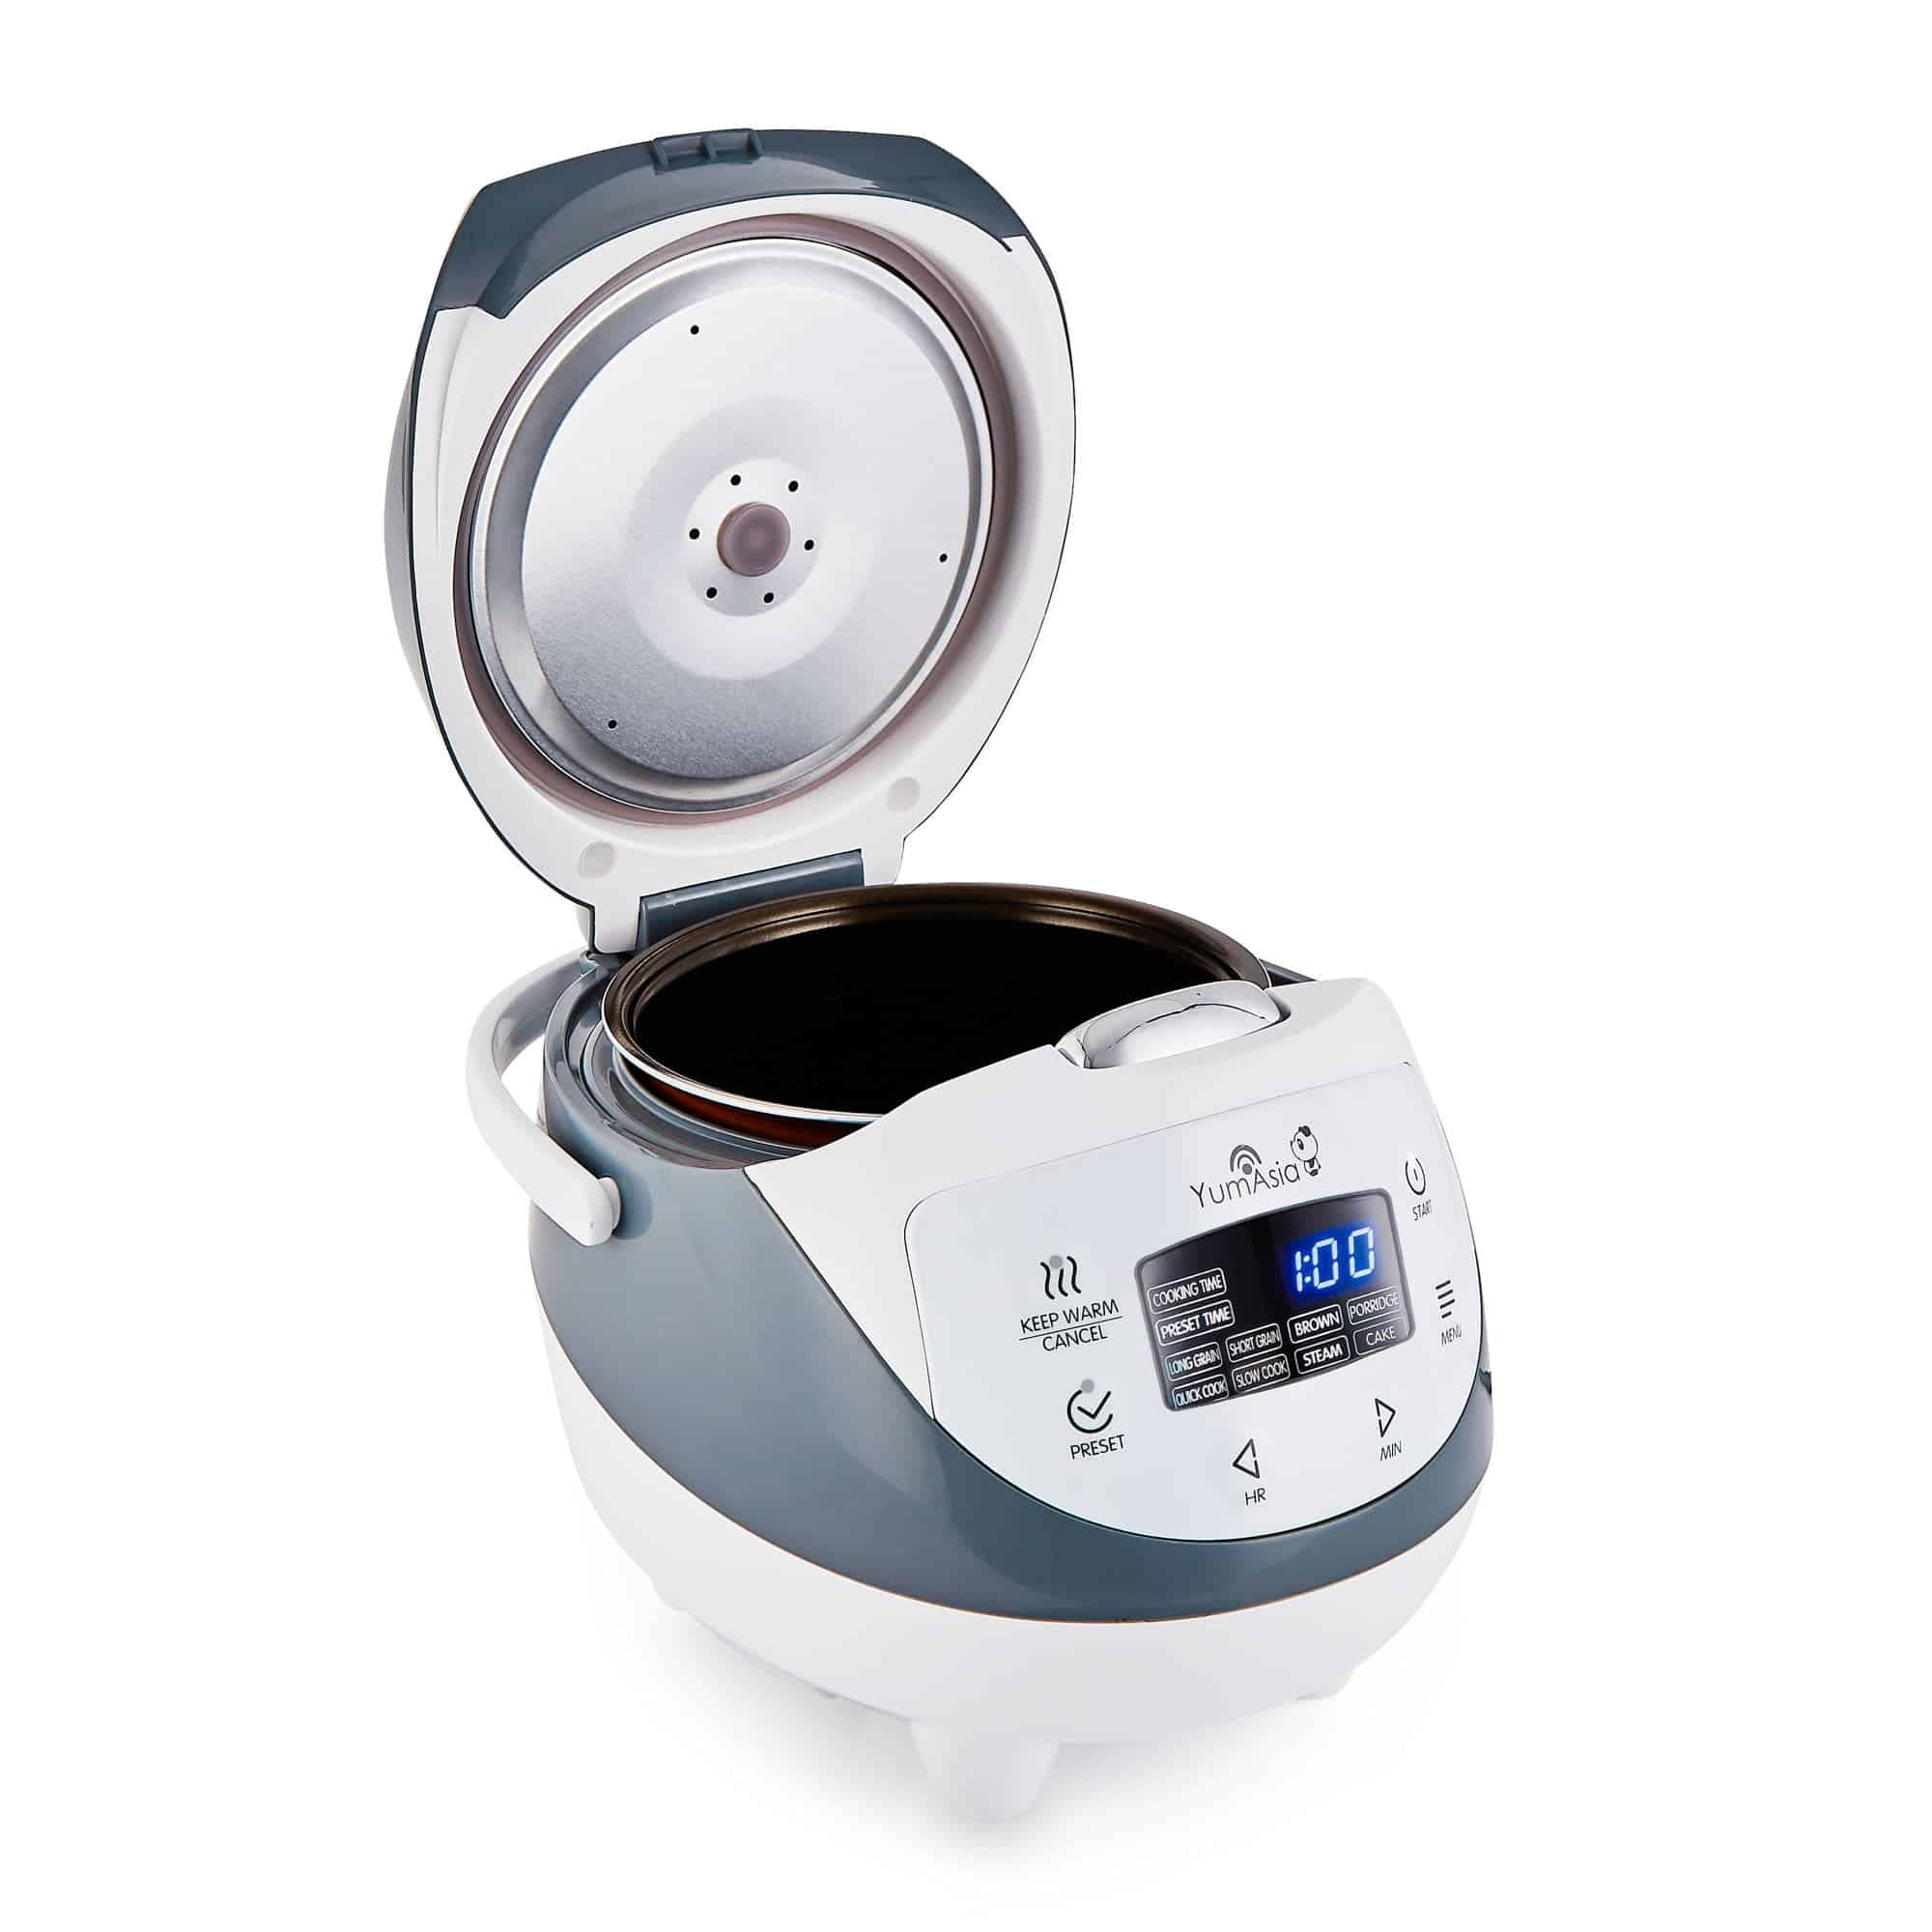 Yum Asia 3.5 Cup Fuzzy Logic Rice Cooker with Ceramic Bowl - 120V, Arctic  White